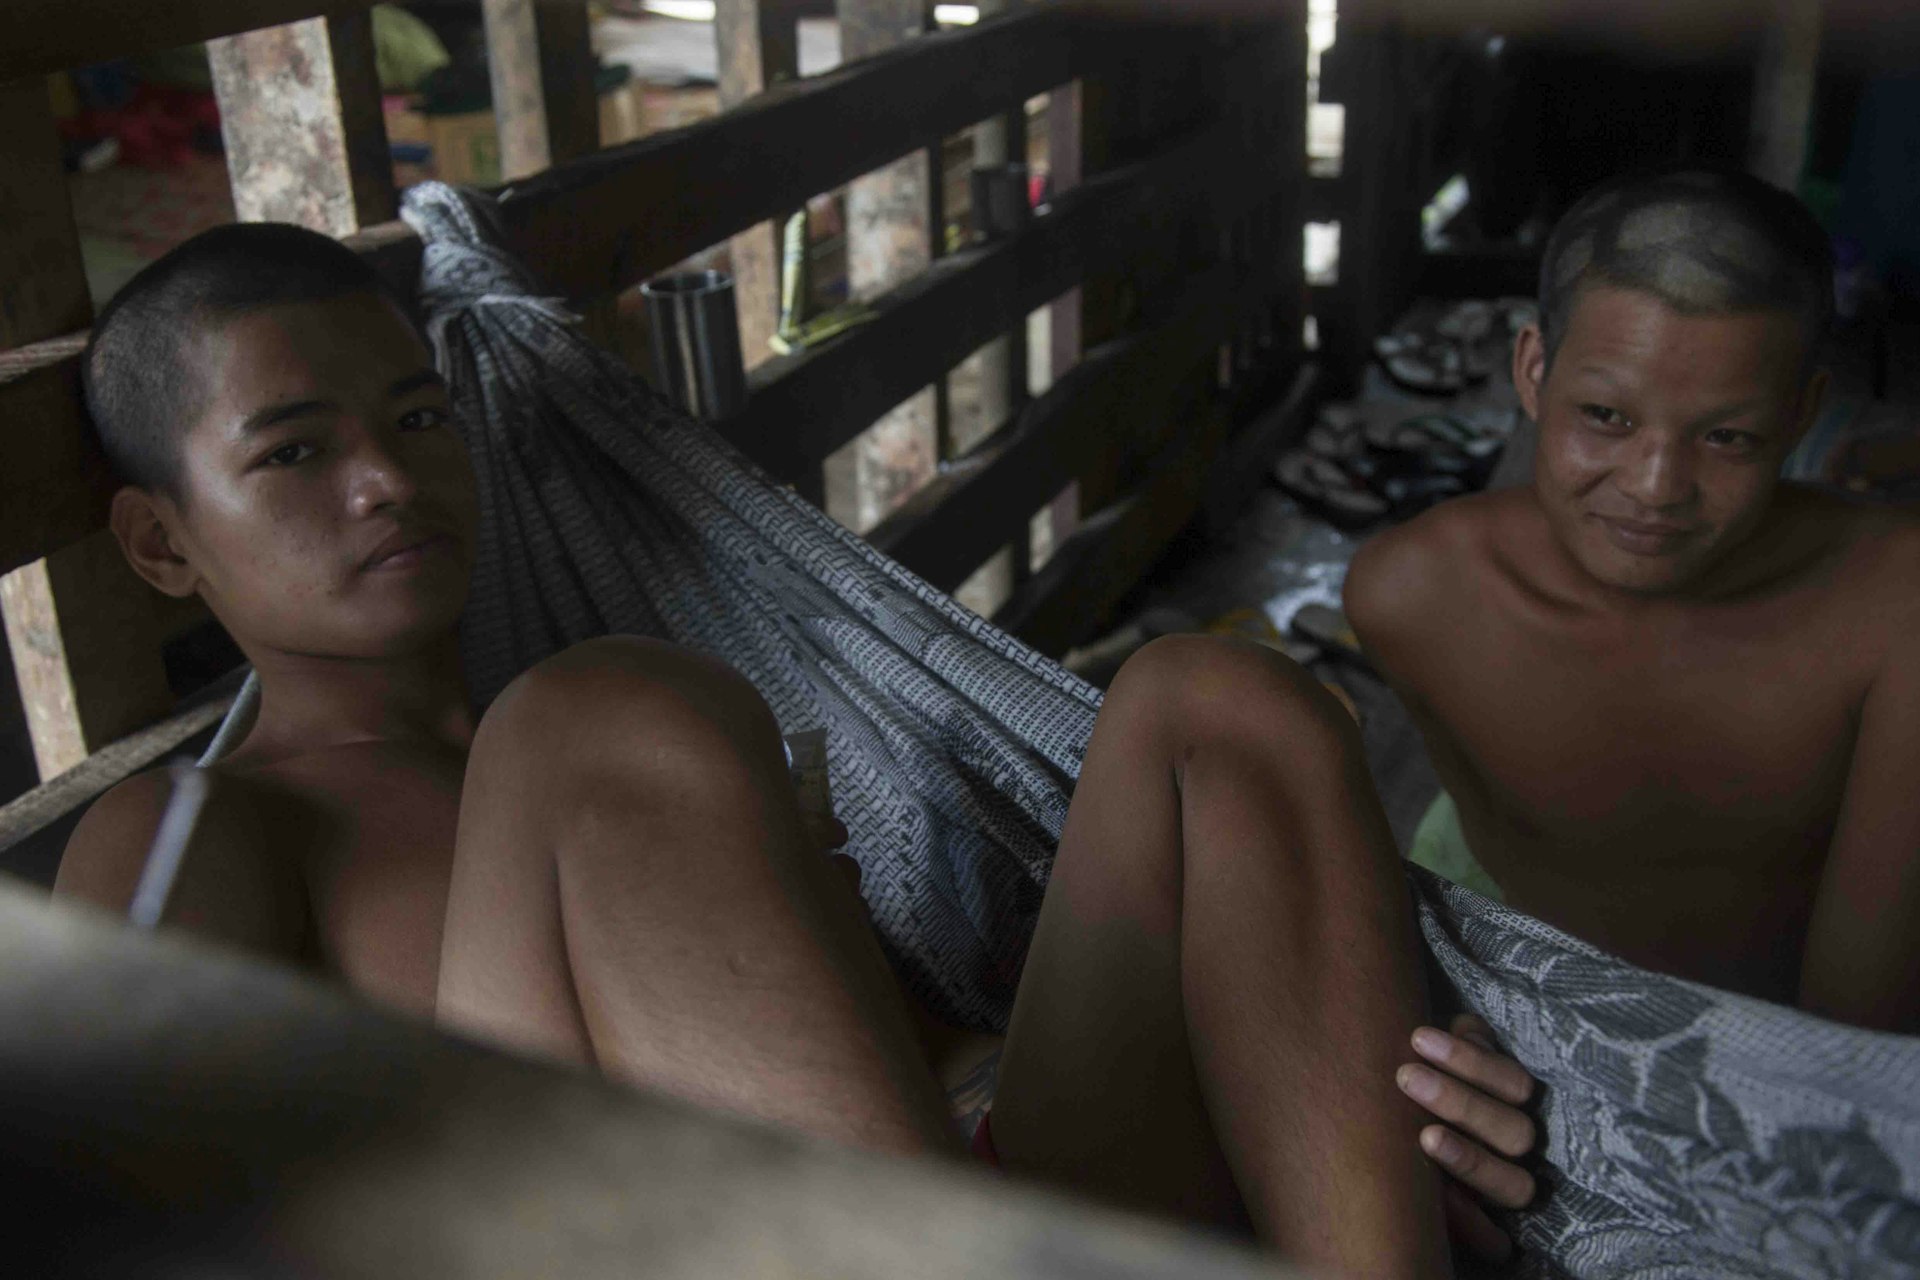 When they arrive at Myitkyina’s detox centre, new arrivals are detained in a wooden cell.